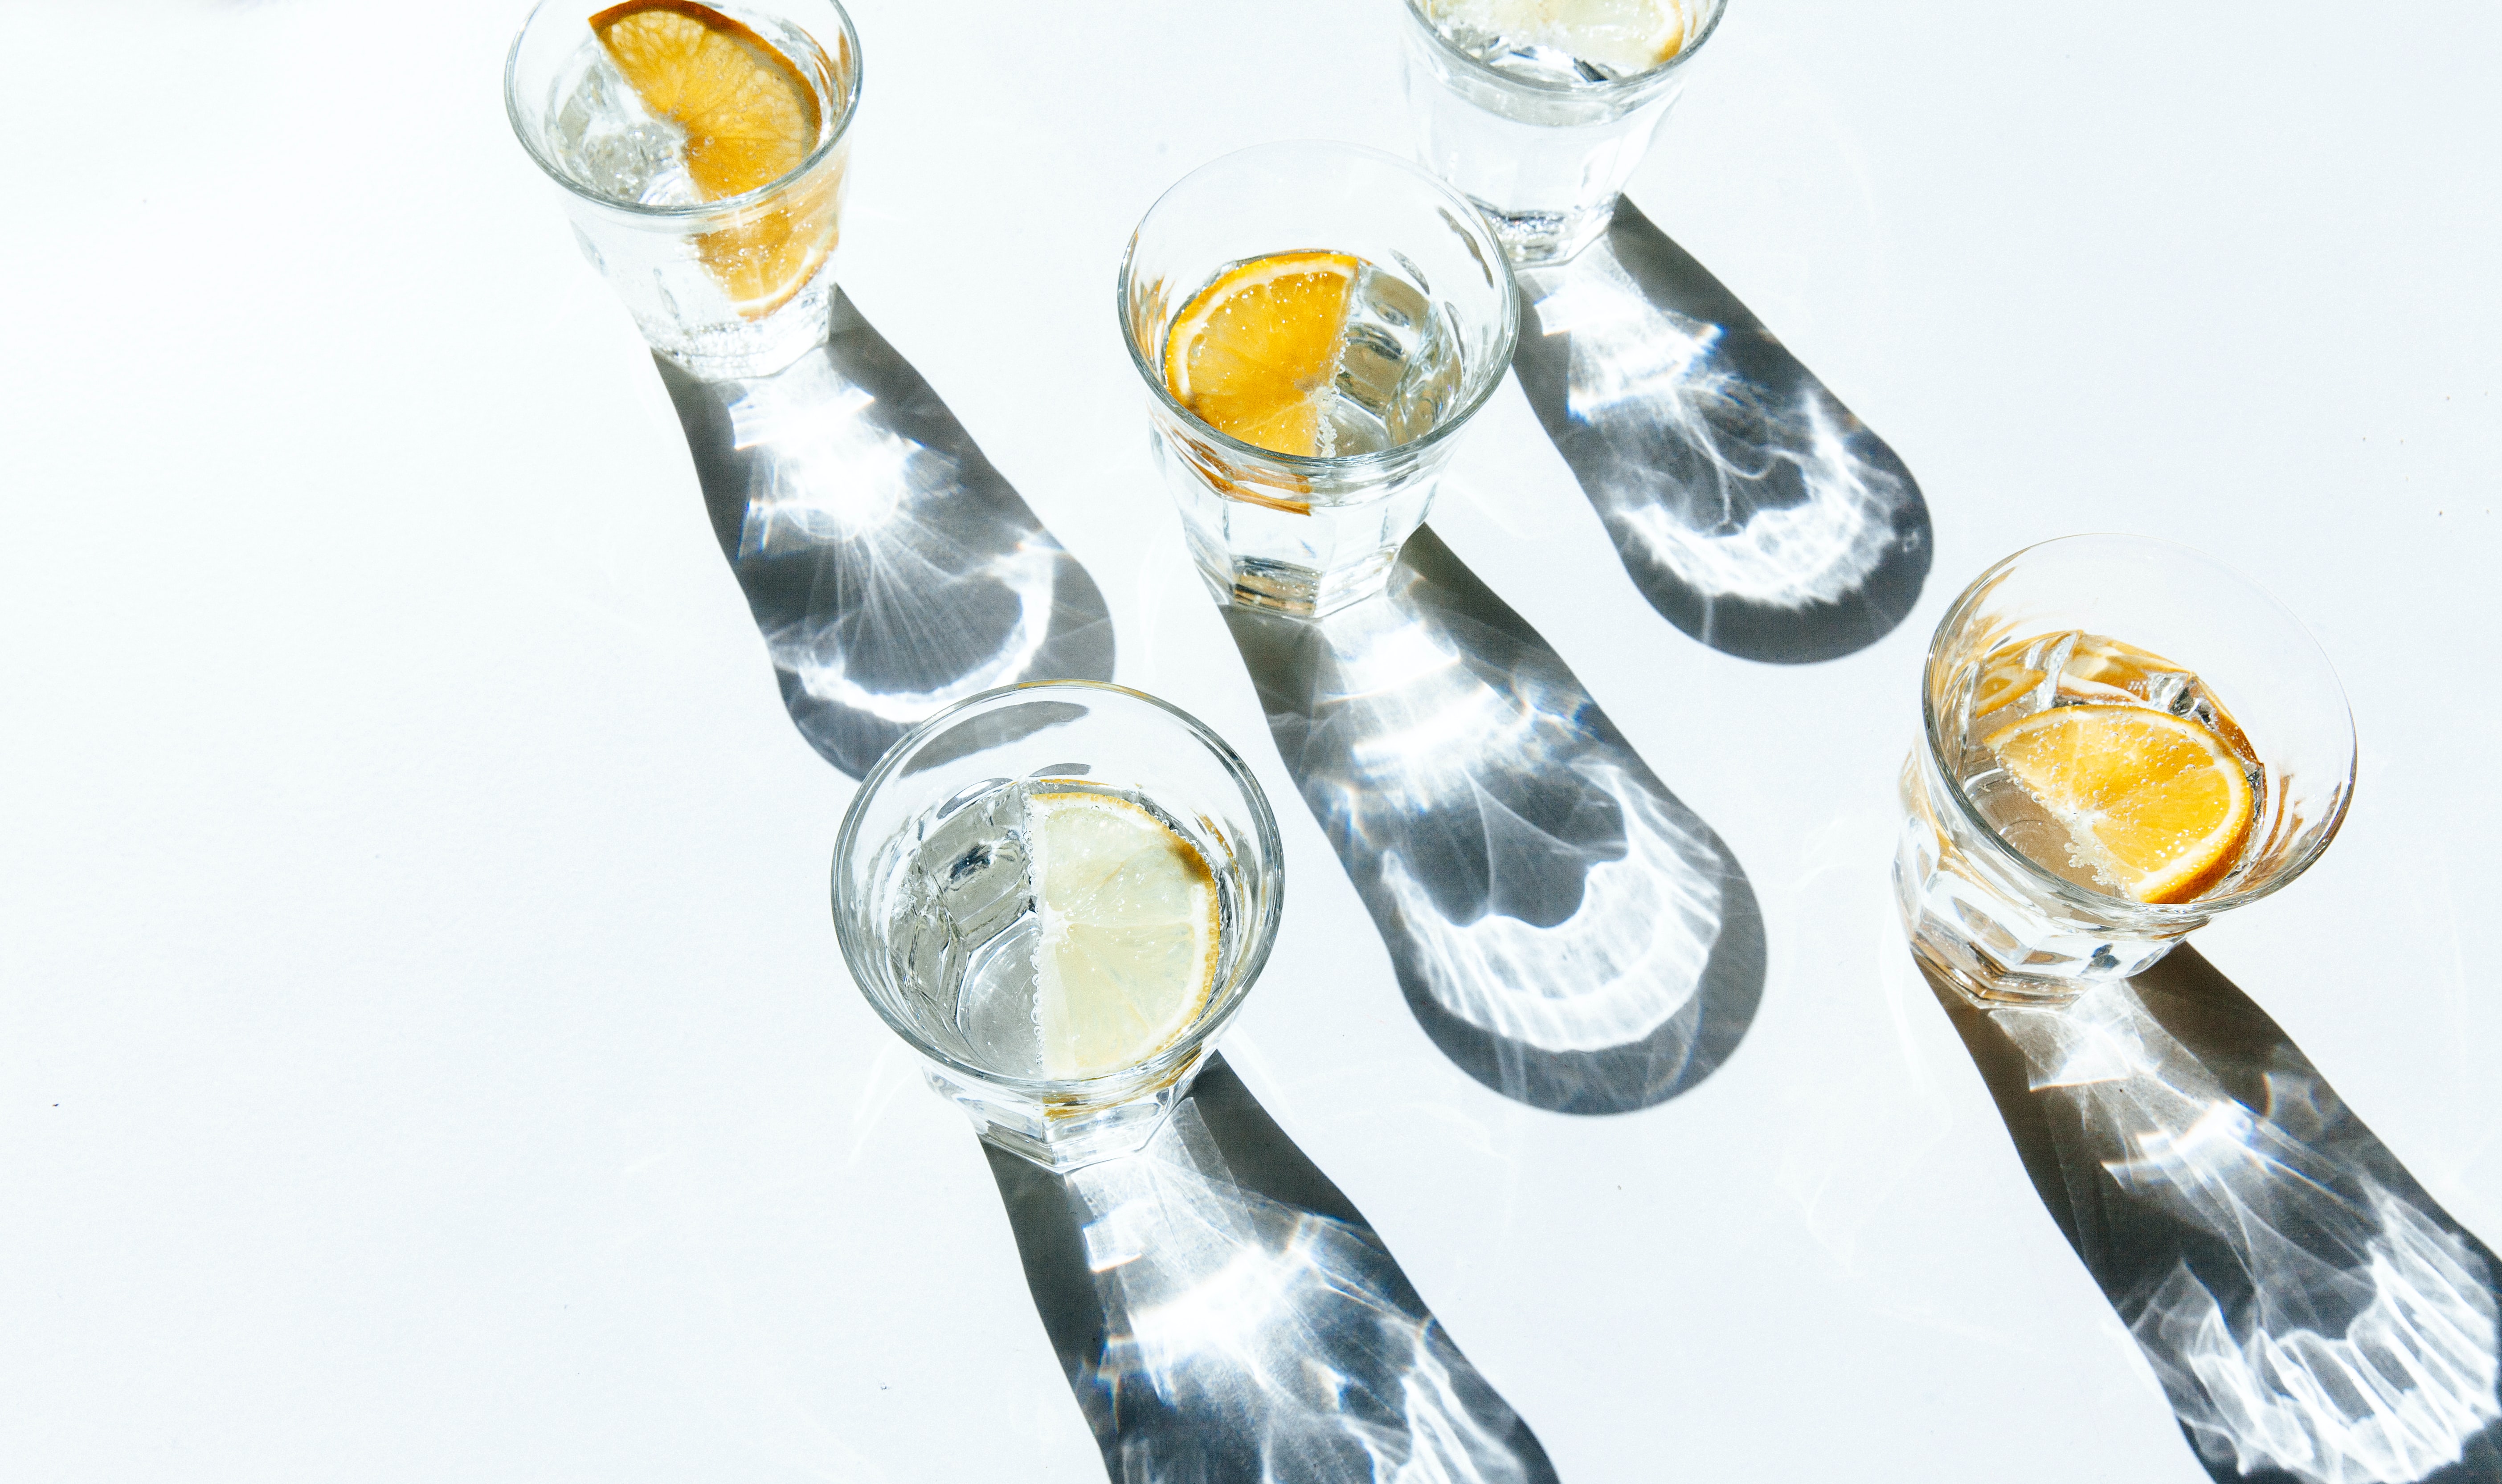 Five shot glasses filled with clear liquid and orange slices.